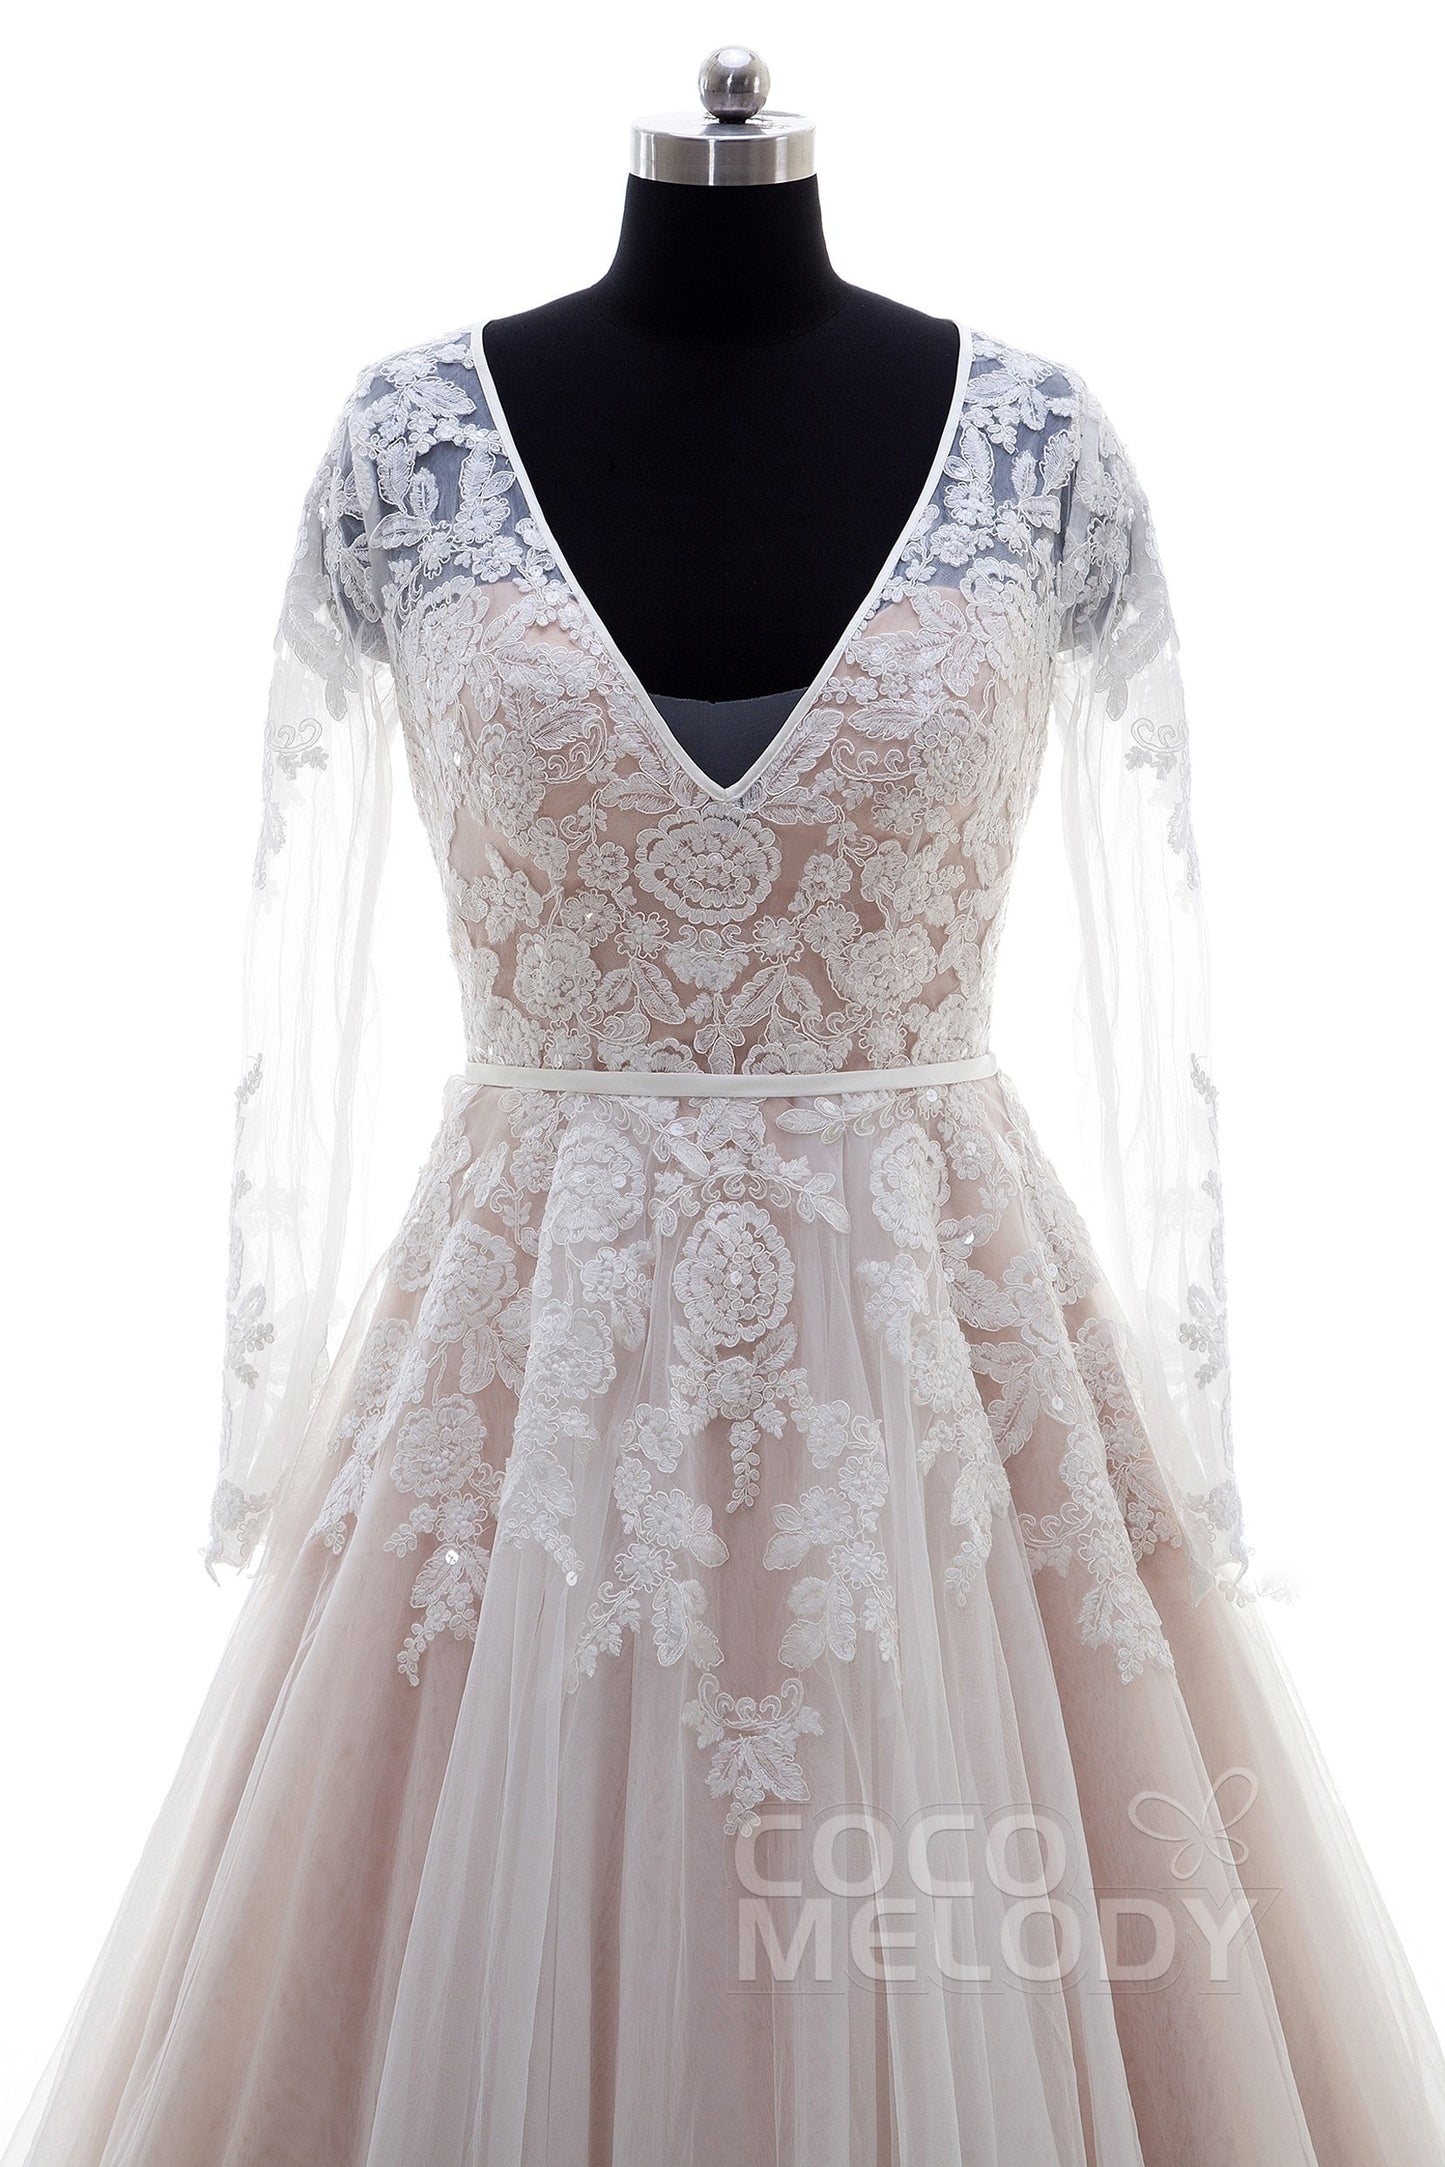 A-Line Court Train Lace and Tulle Wedding Dress LD4432